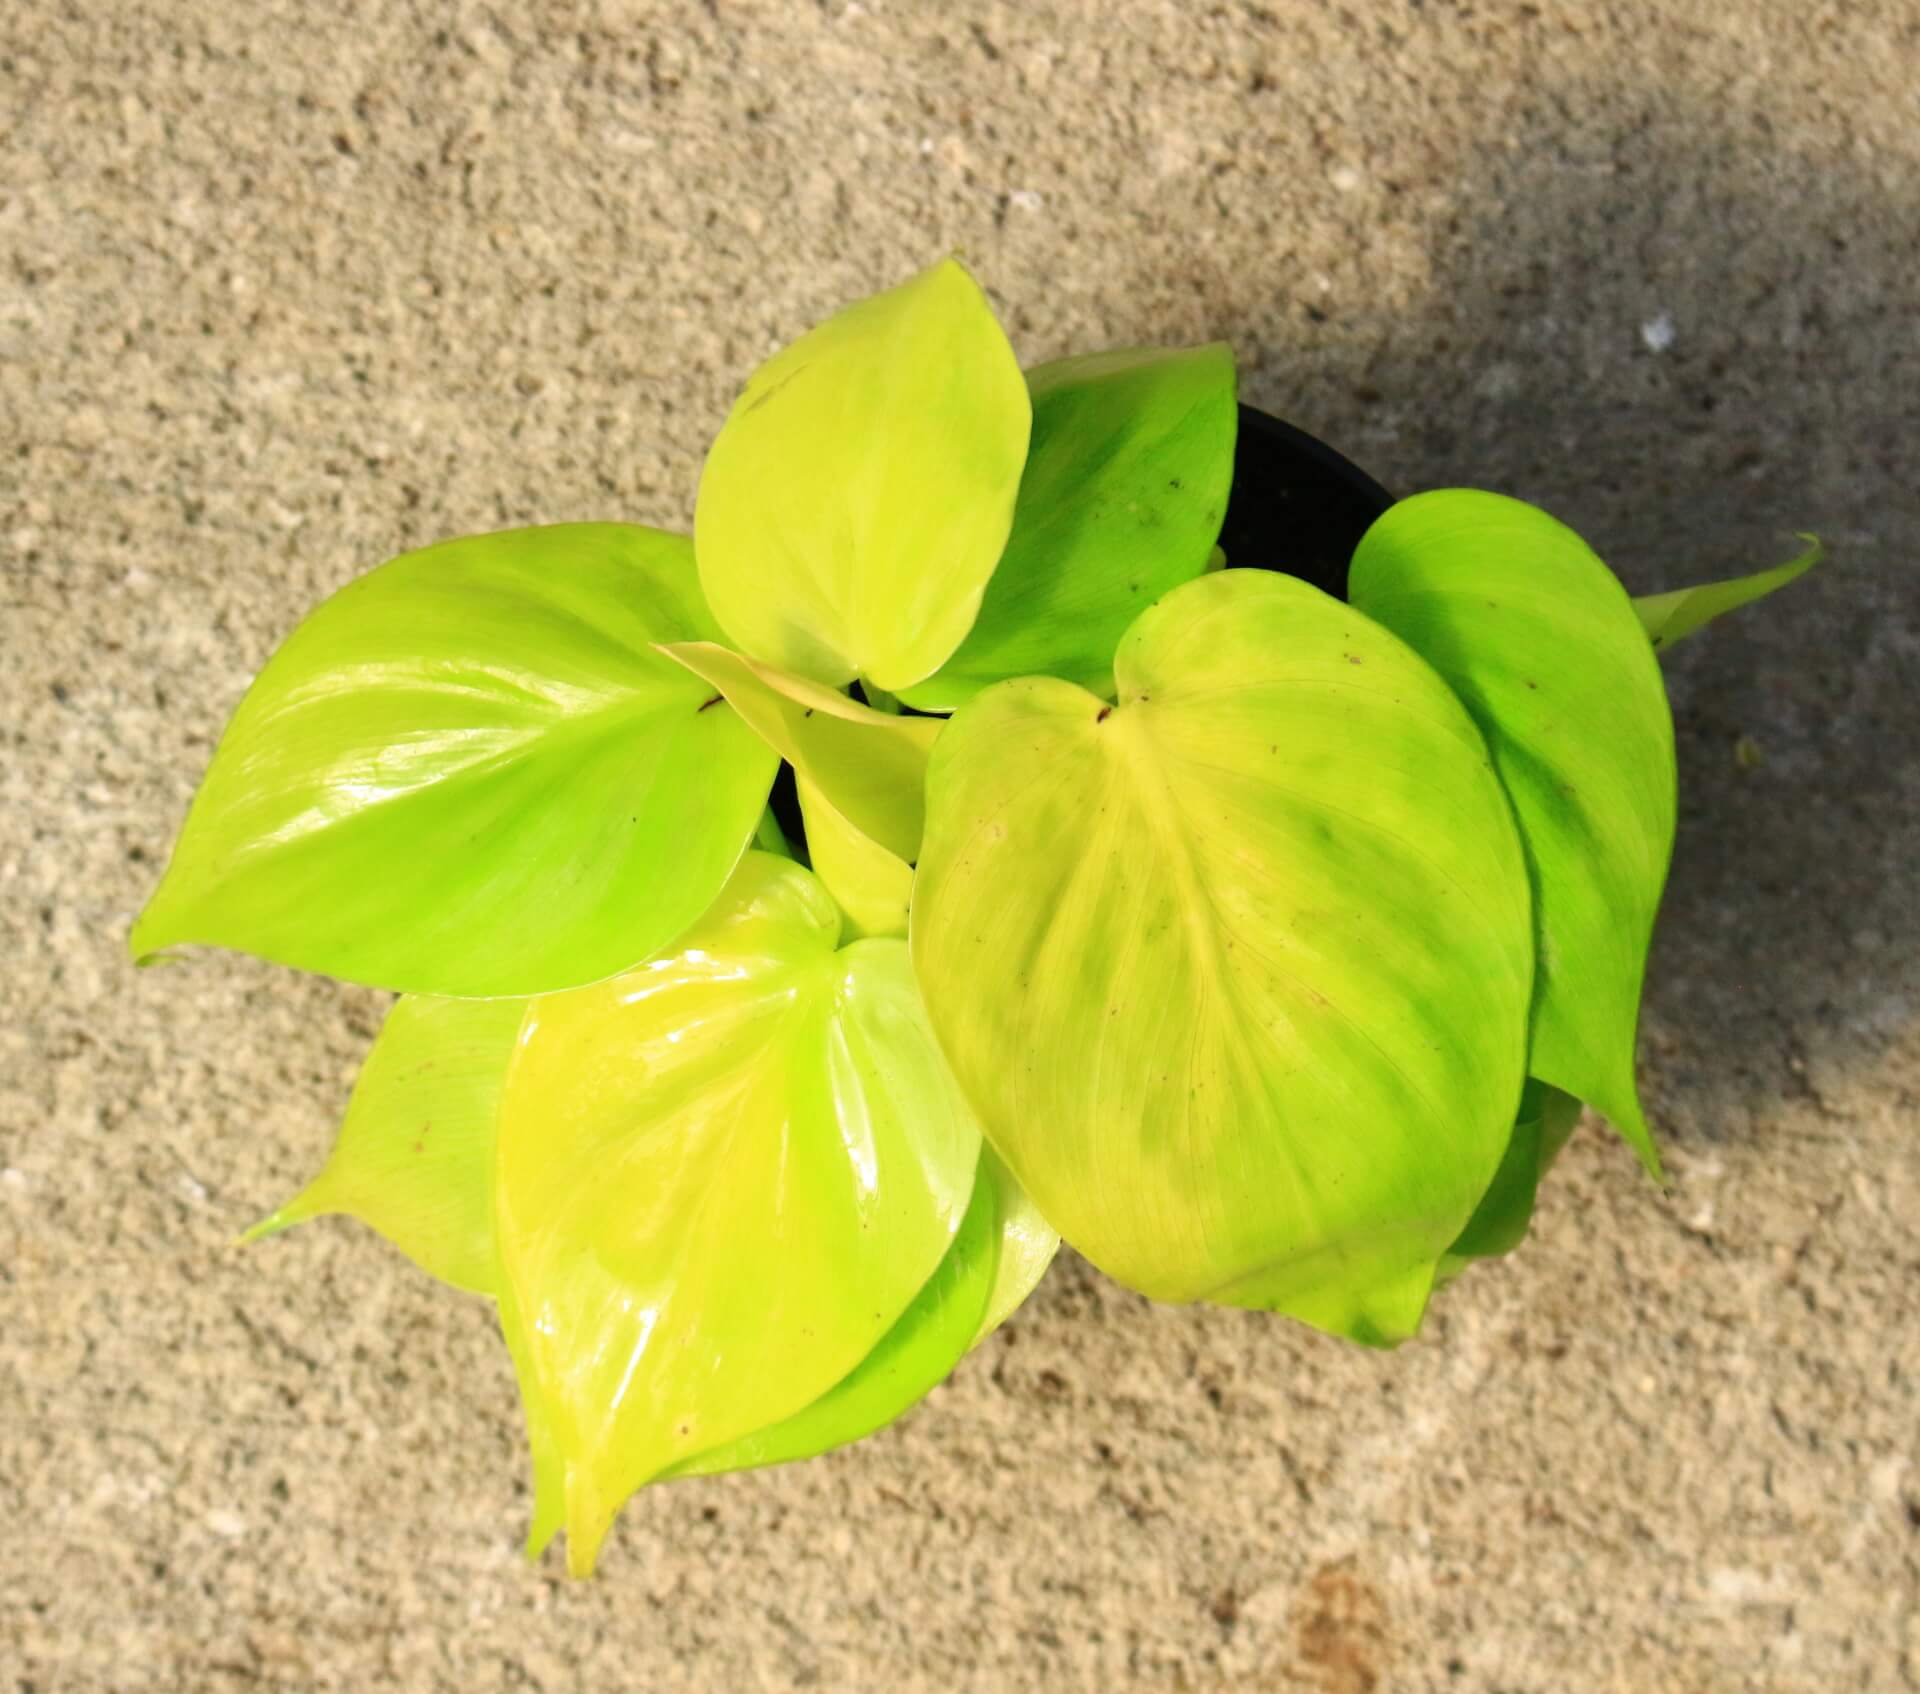 Philodendron 'lemon lime' has bright yellow heart shaped leaves that grow in long vines.